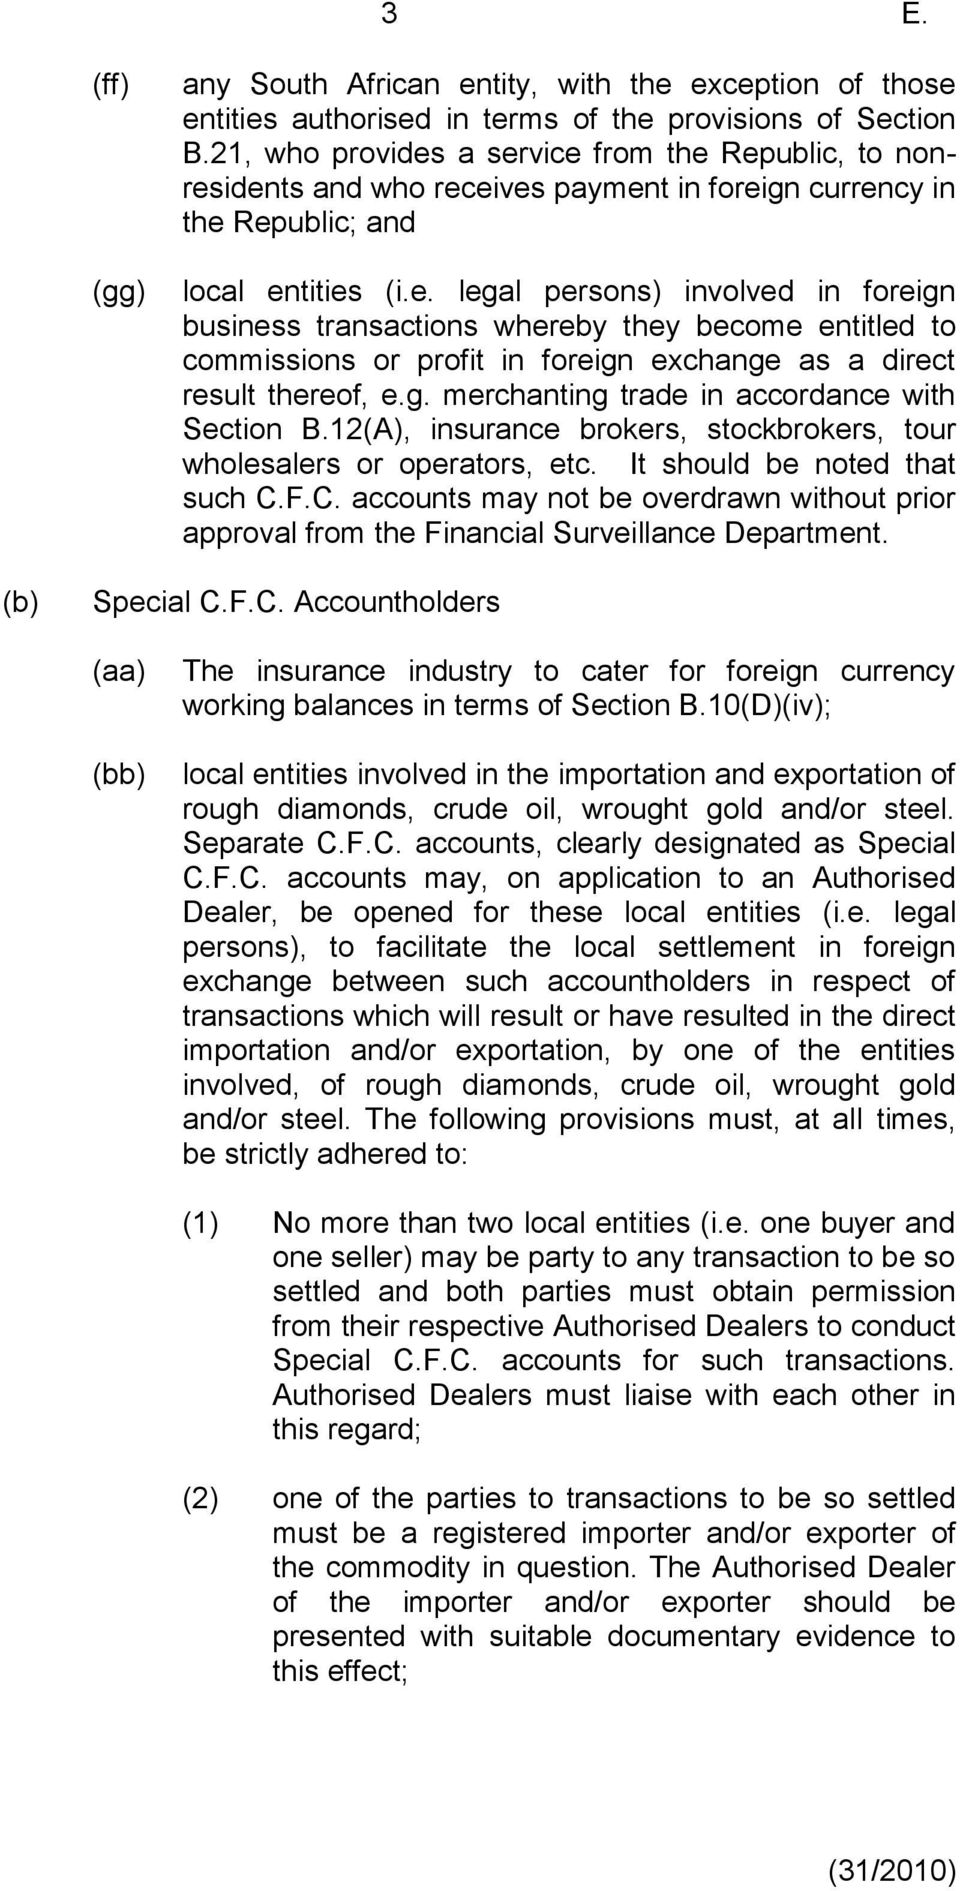 g. merchanting trade in accordance with Section B.12(A), insurance brokers, stockbrokers, tour wholesalers or operators, etc. It should be noted that such C.